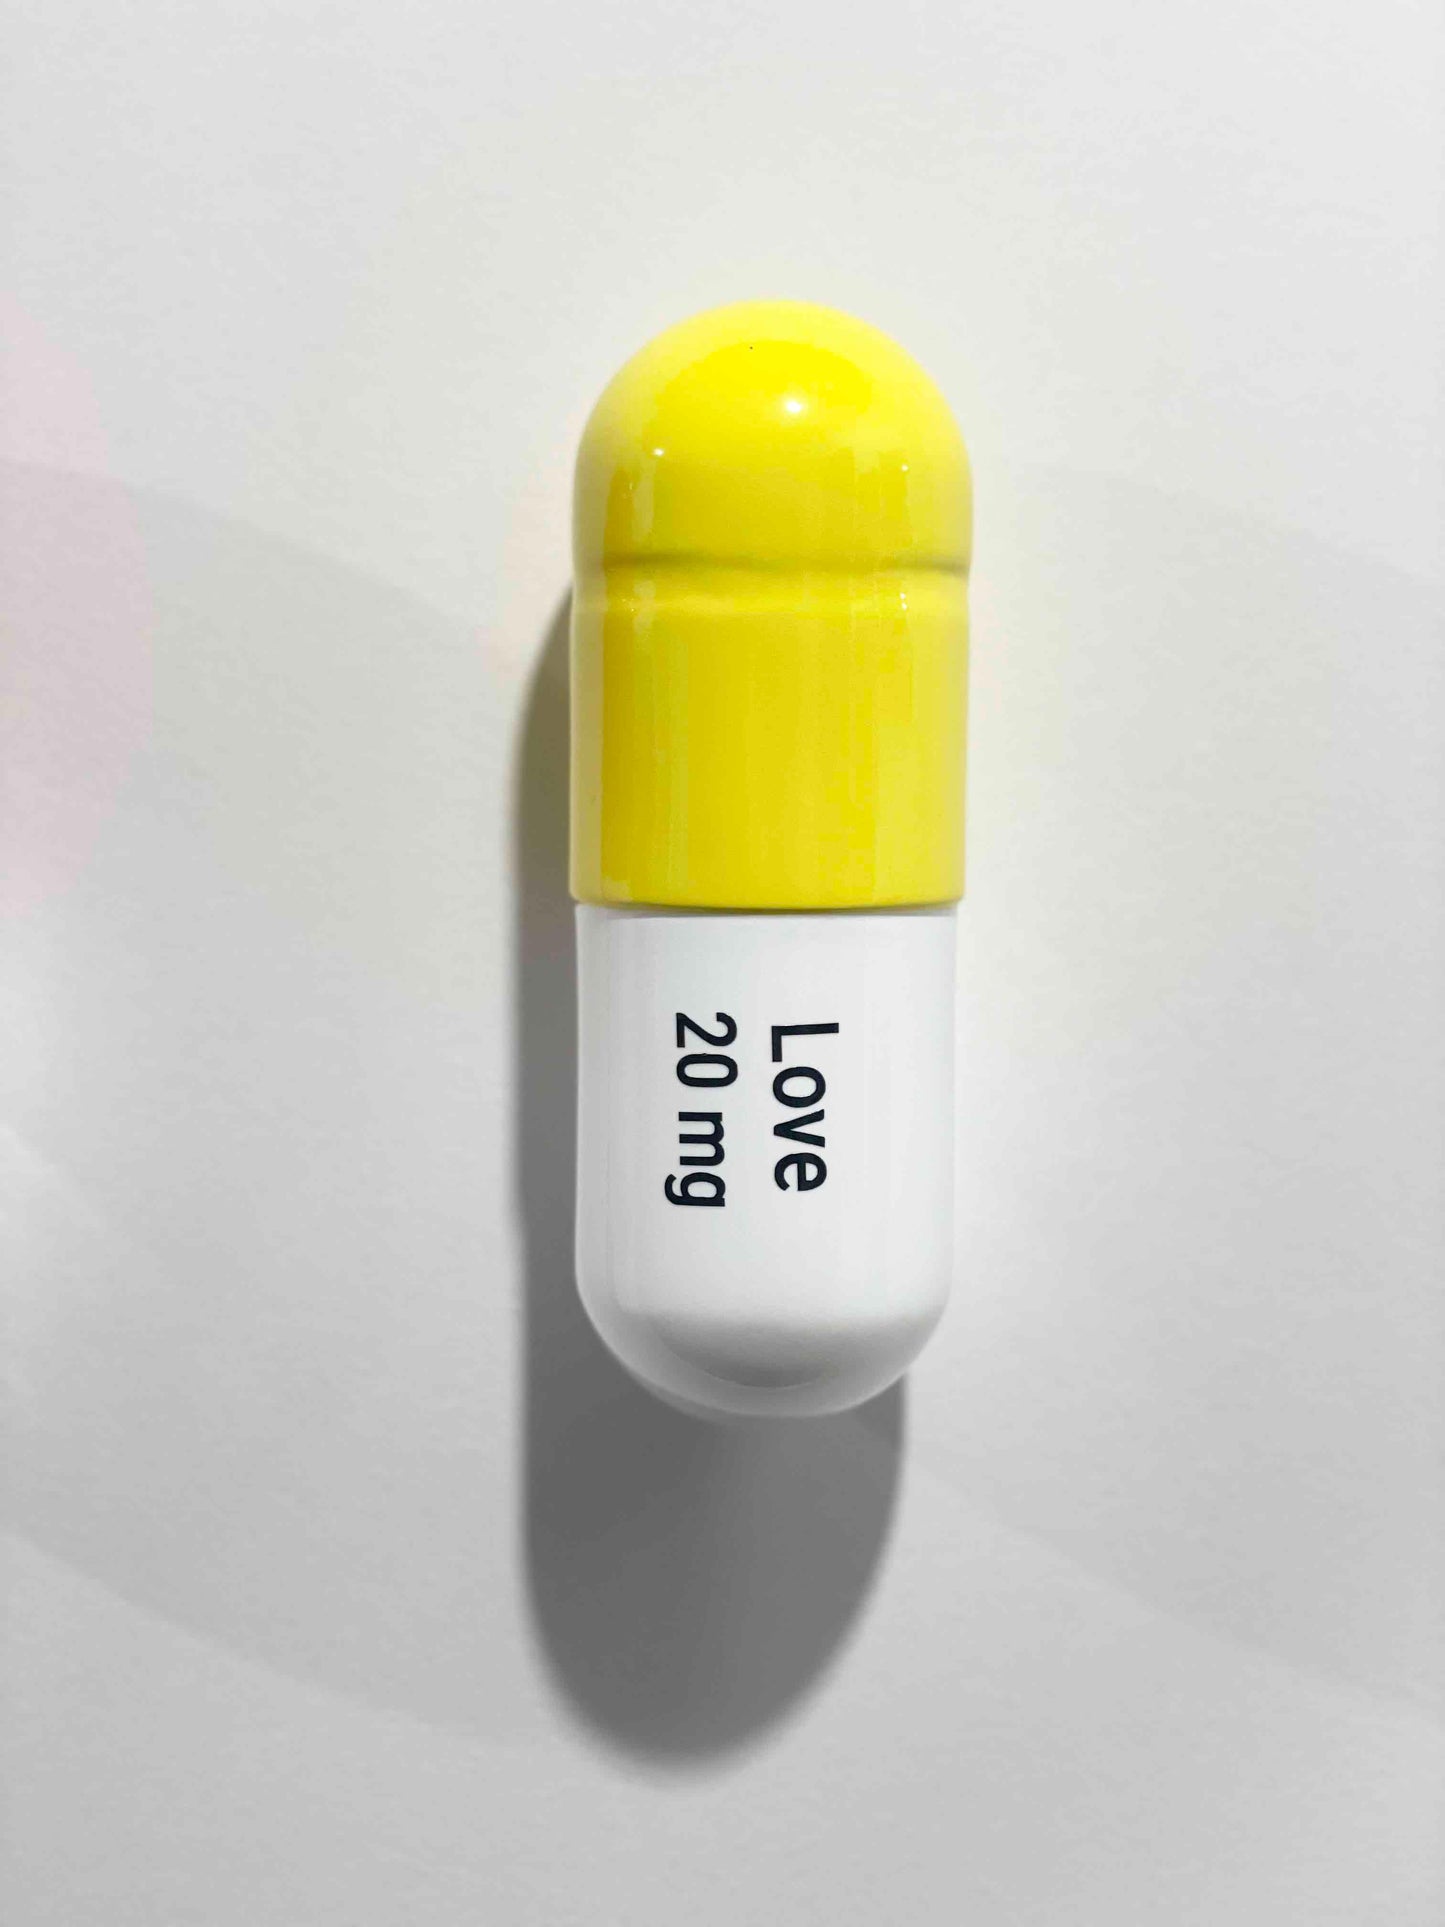 20 MG Love pill Combo (red, yellow, white) - figurative sculpture